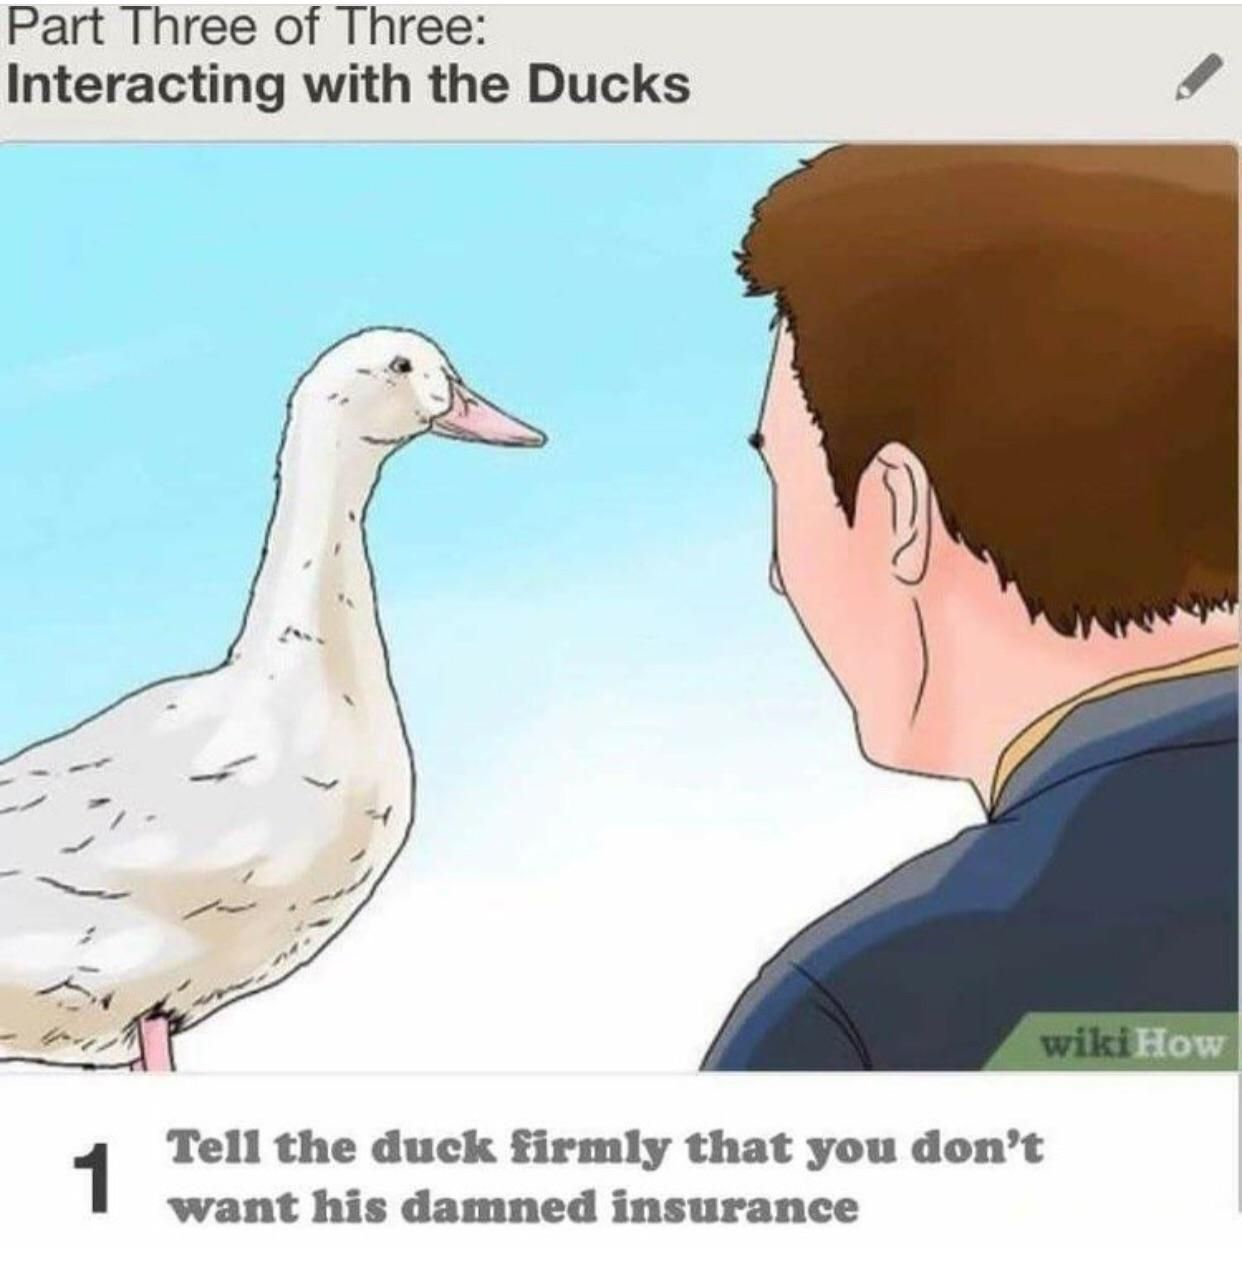 Interacting with ducks: Rule 1